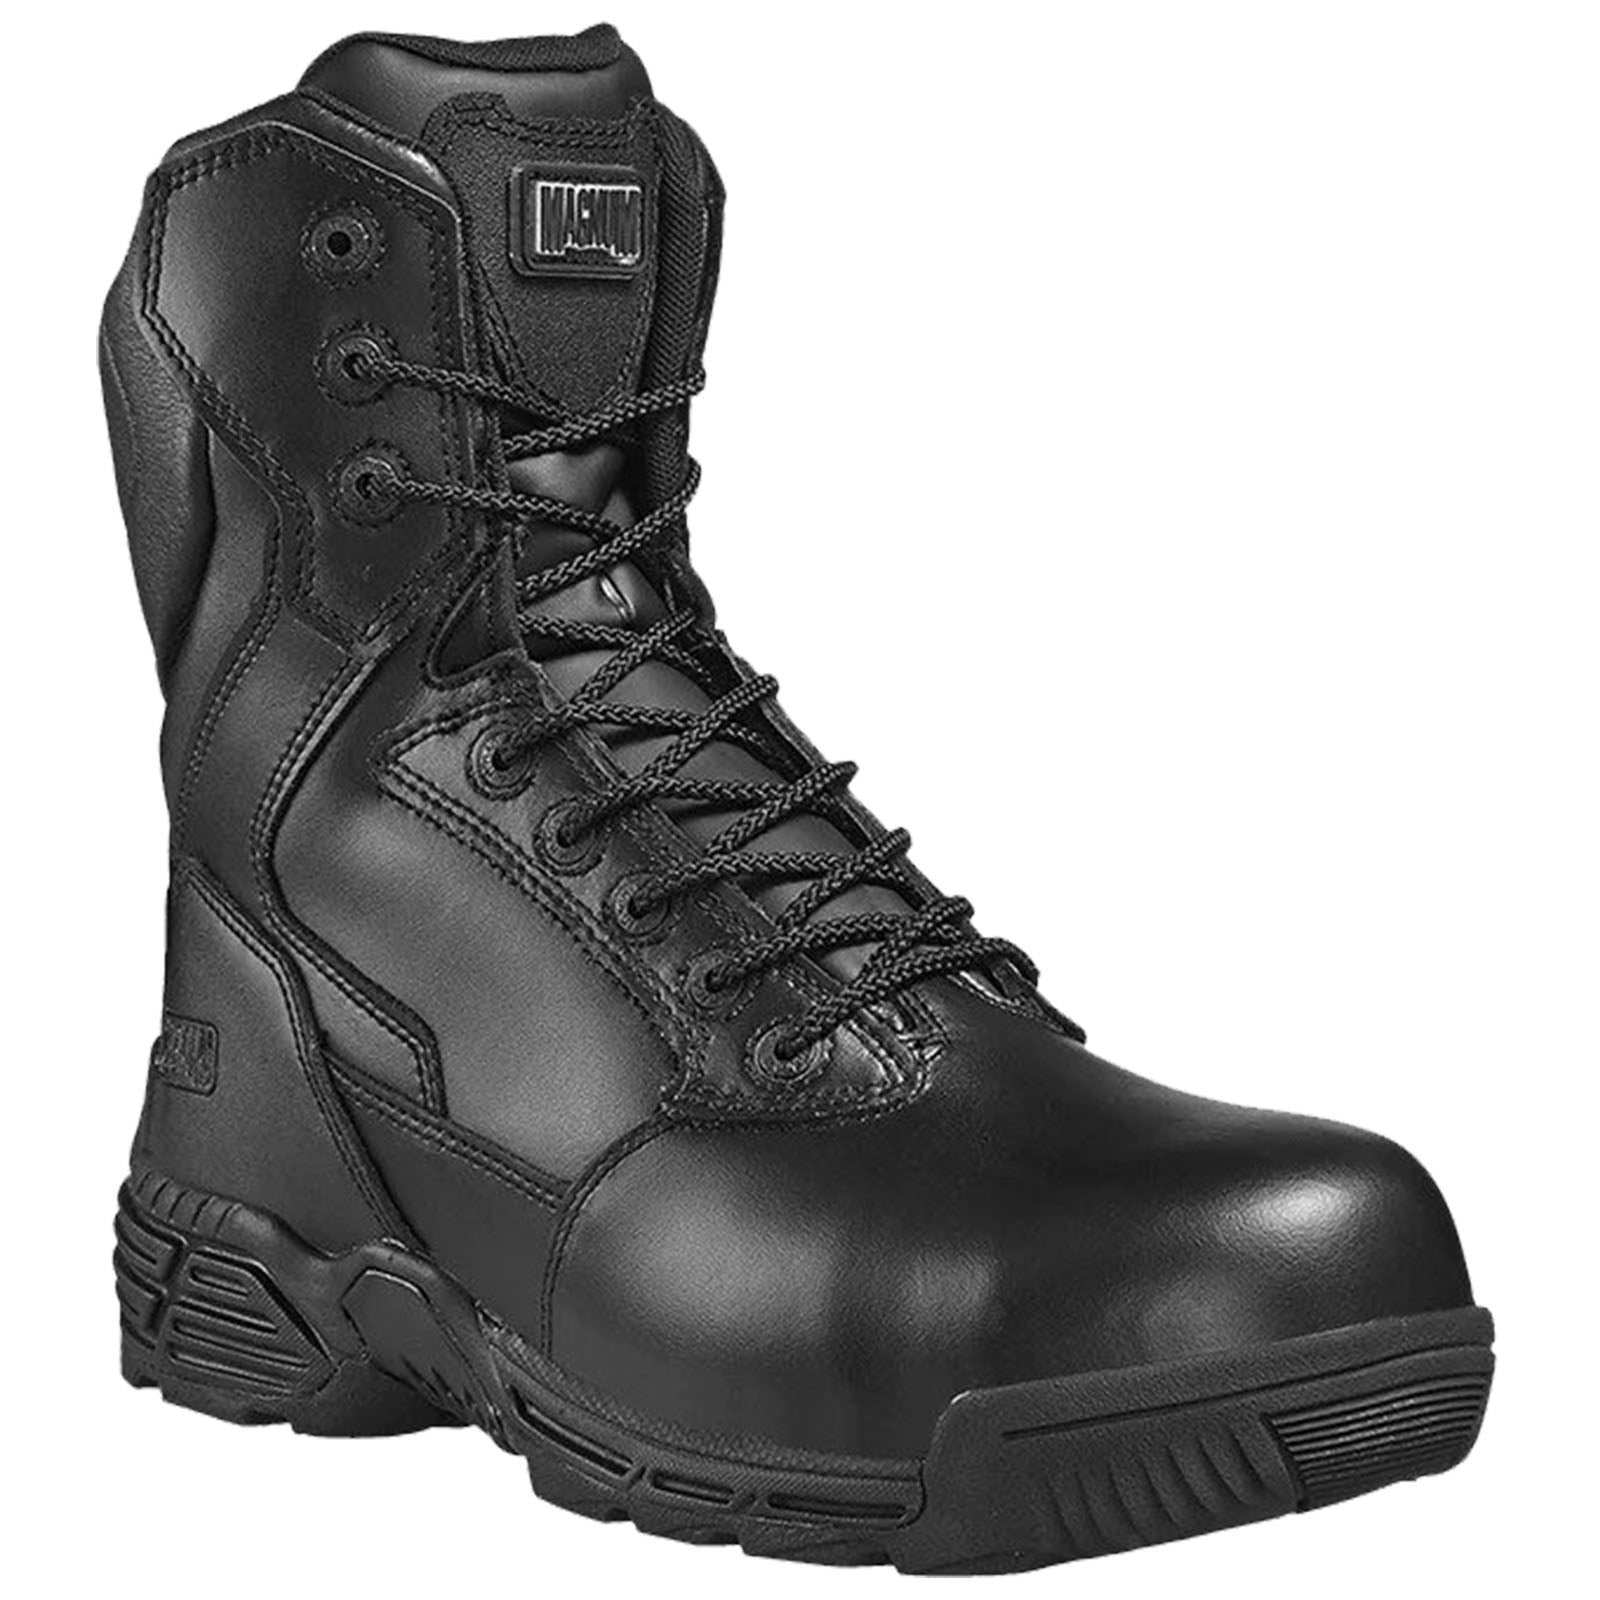 Magnum Unisex Stealth Force 8.0 Safety Boots